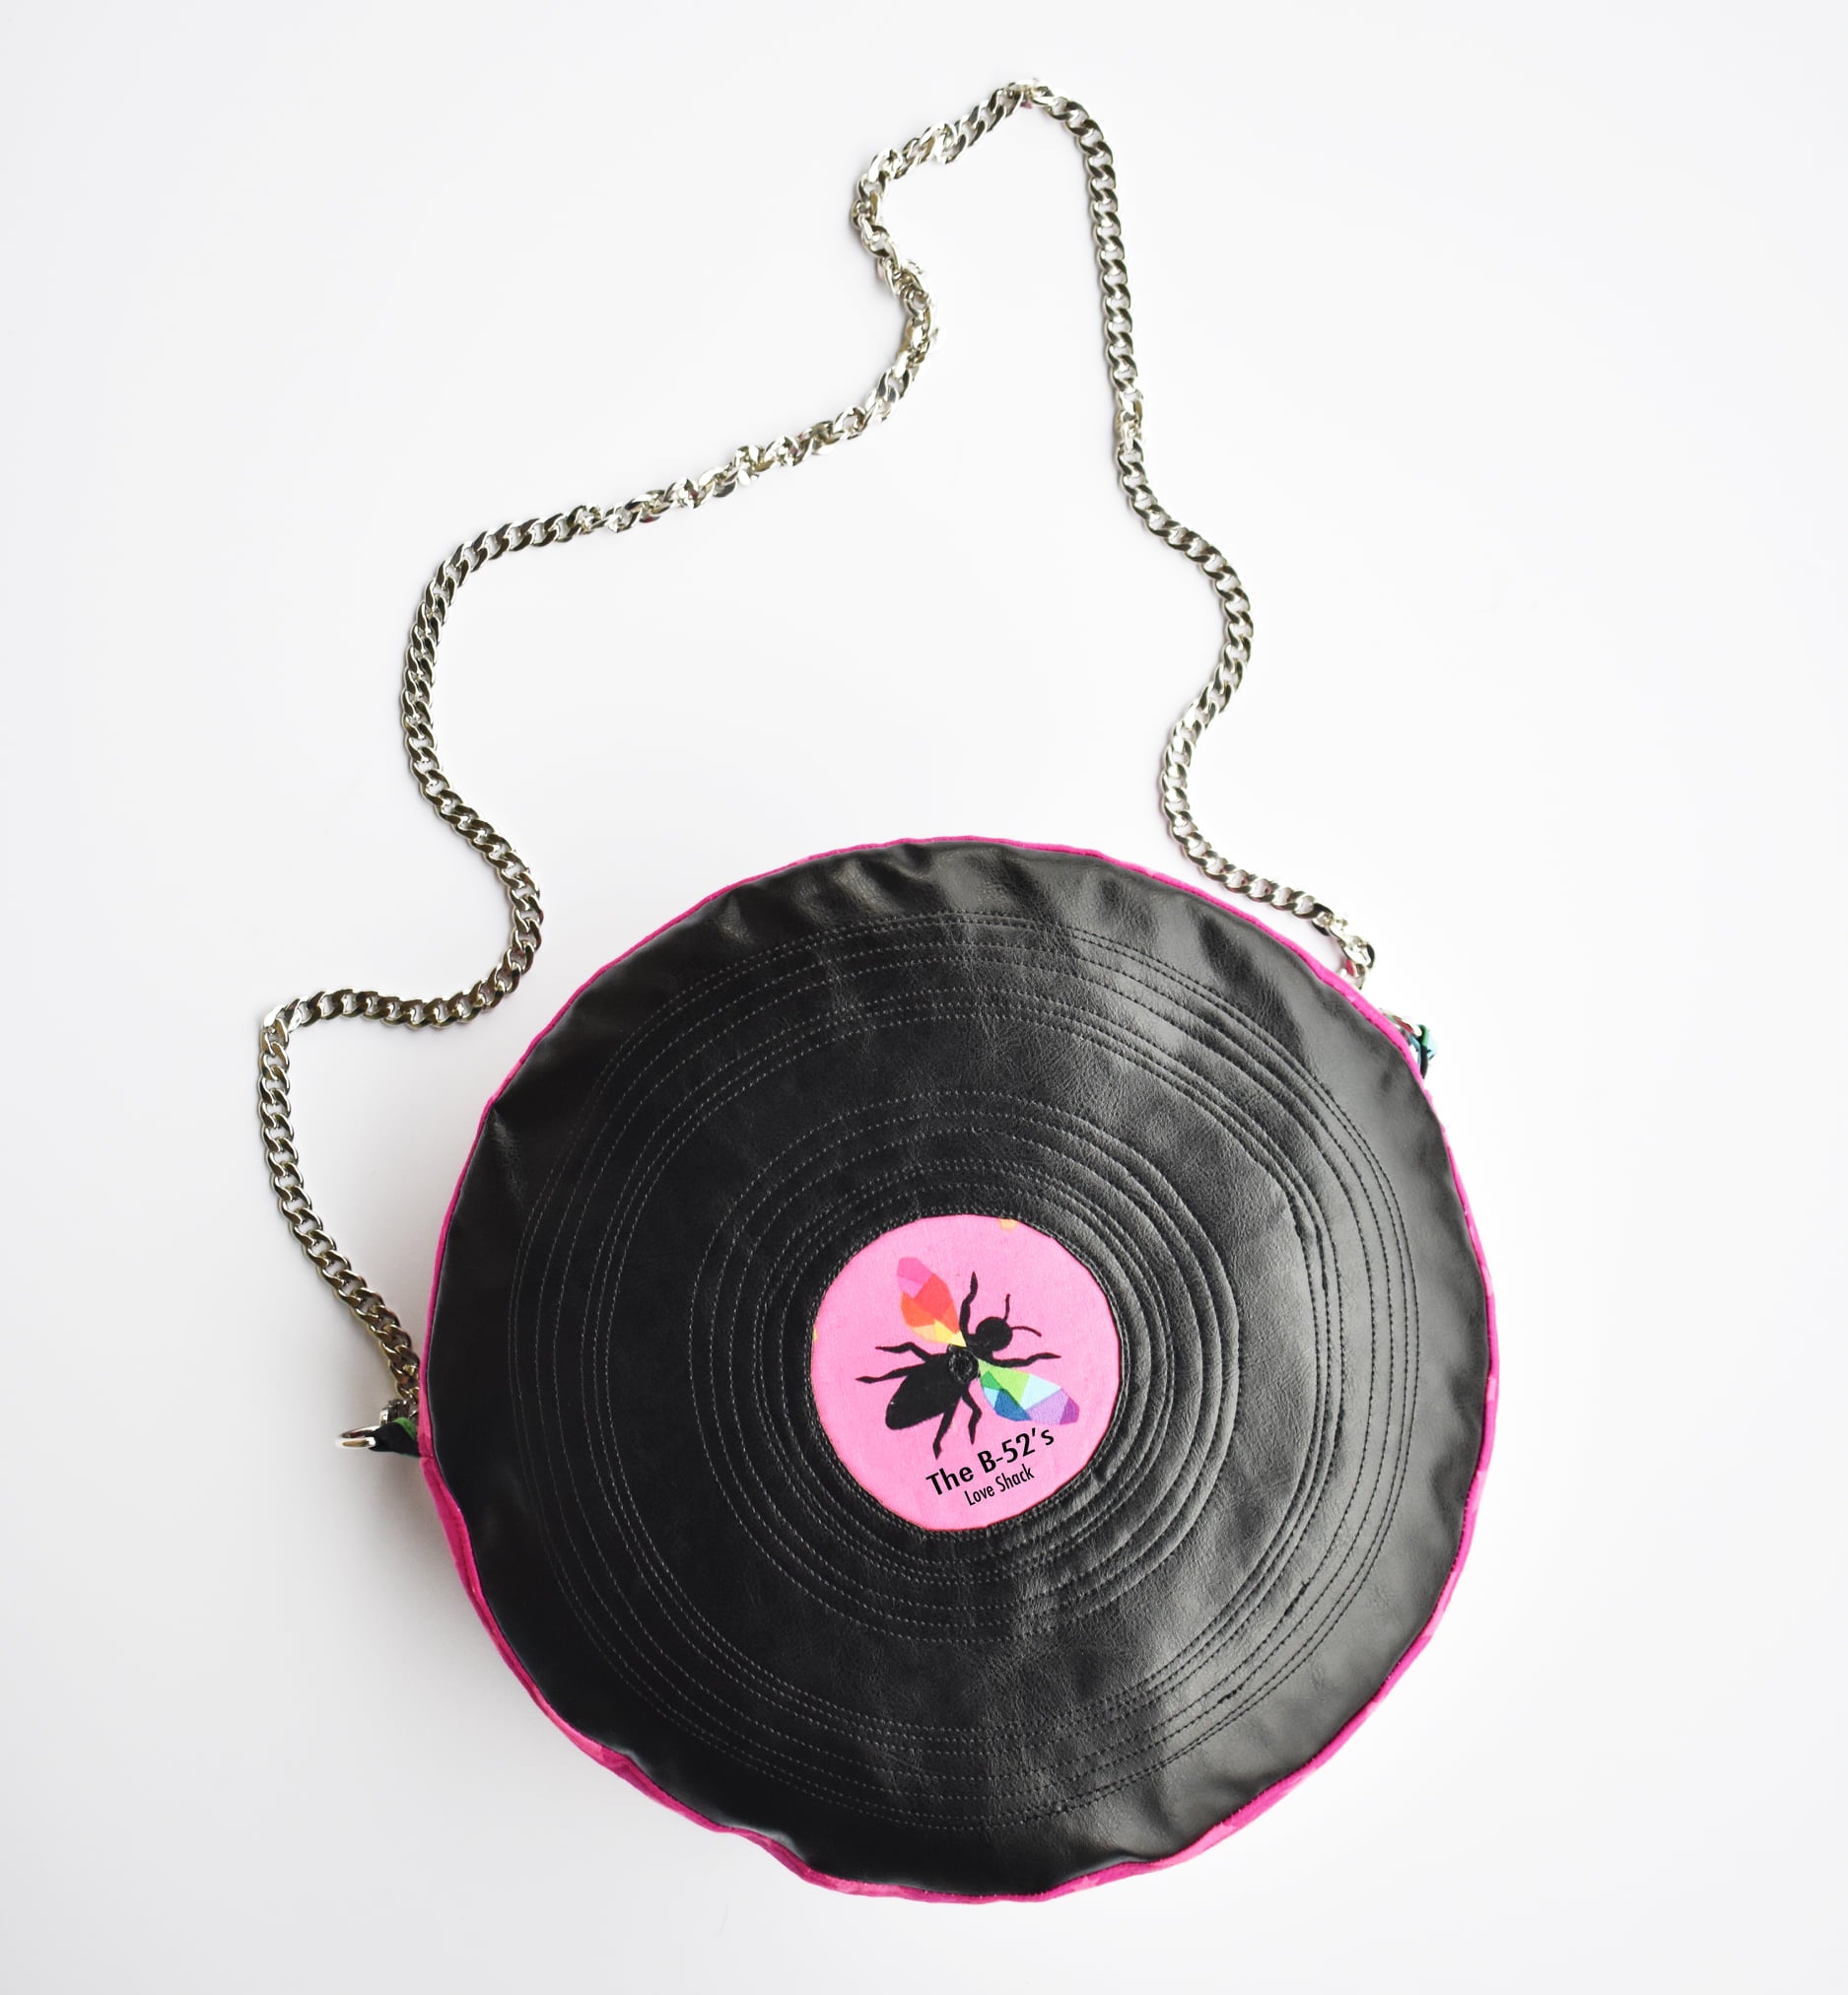 Lp Bag · A Vinyl Record Purse · Sewing on Cut Out + Keep